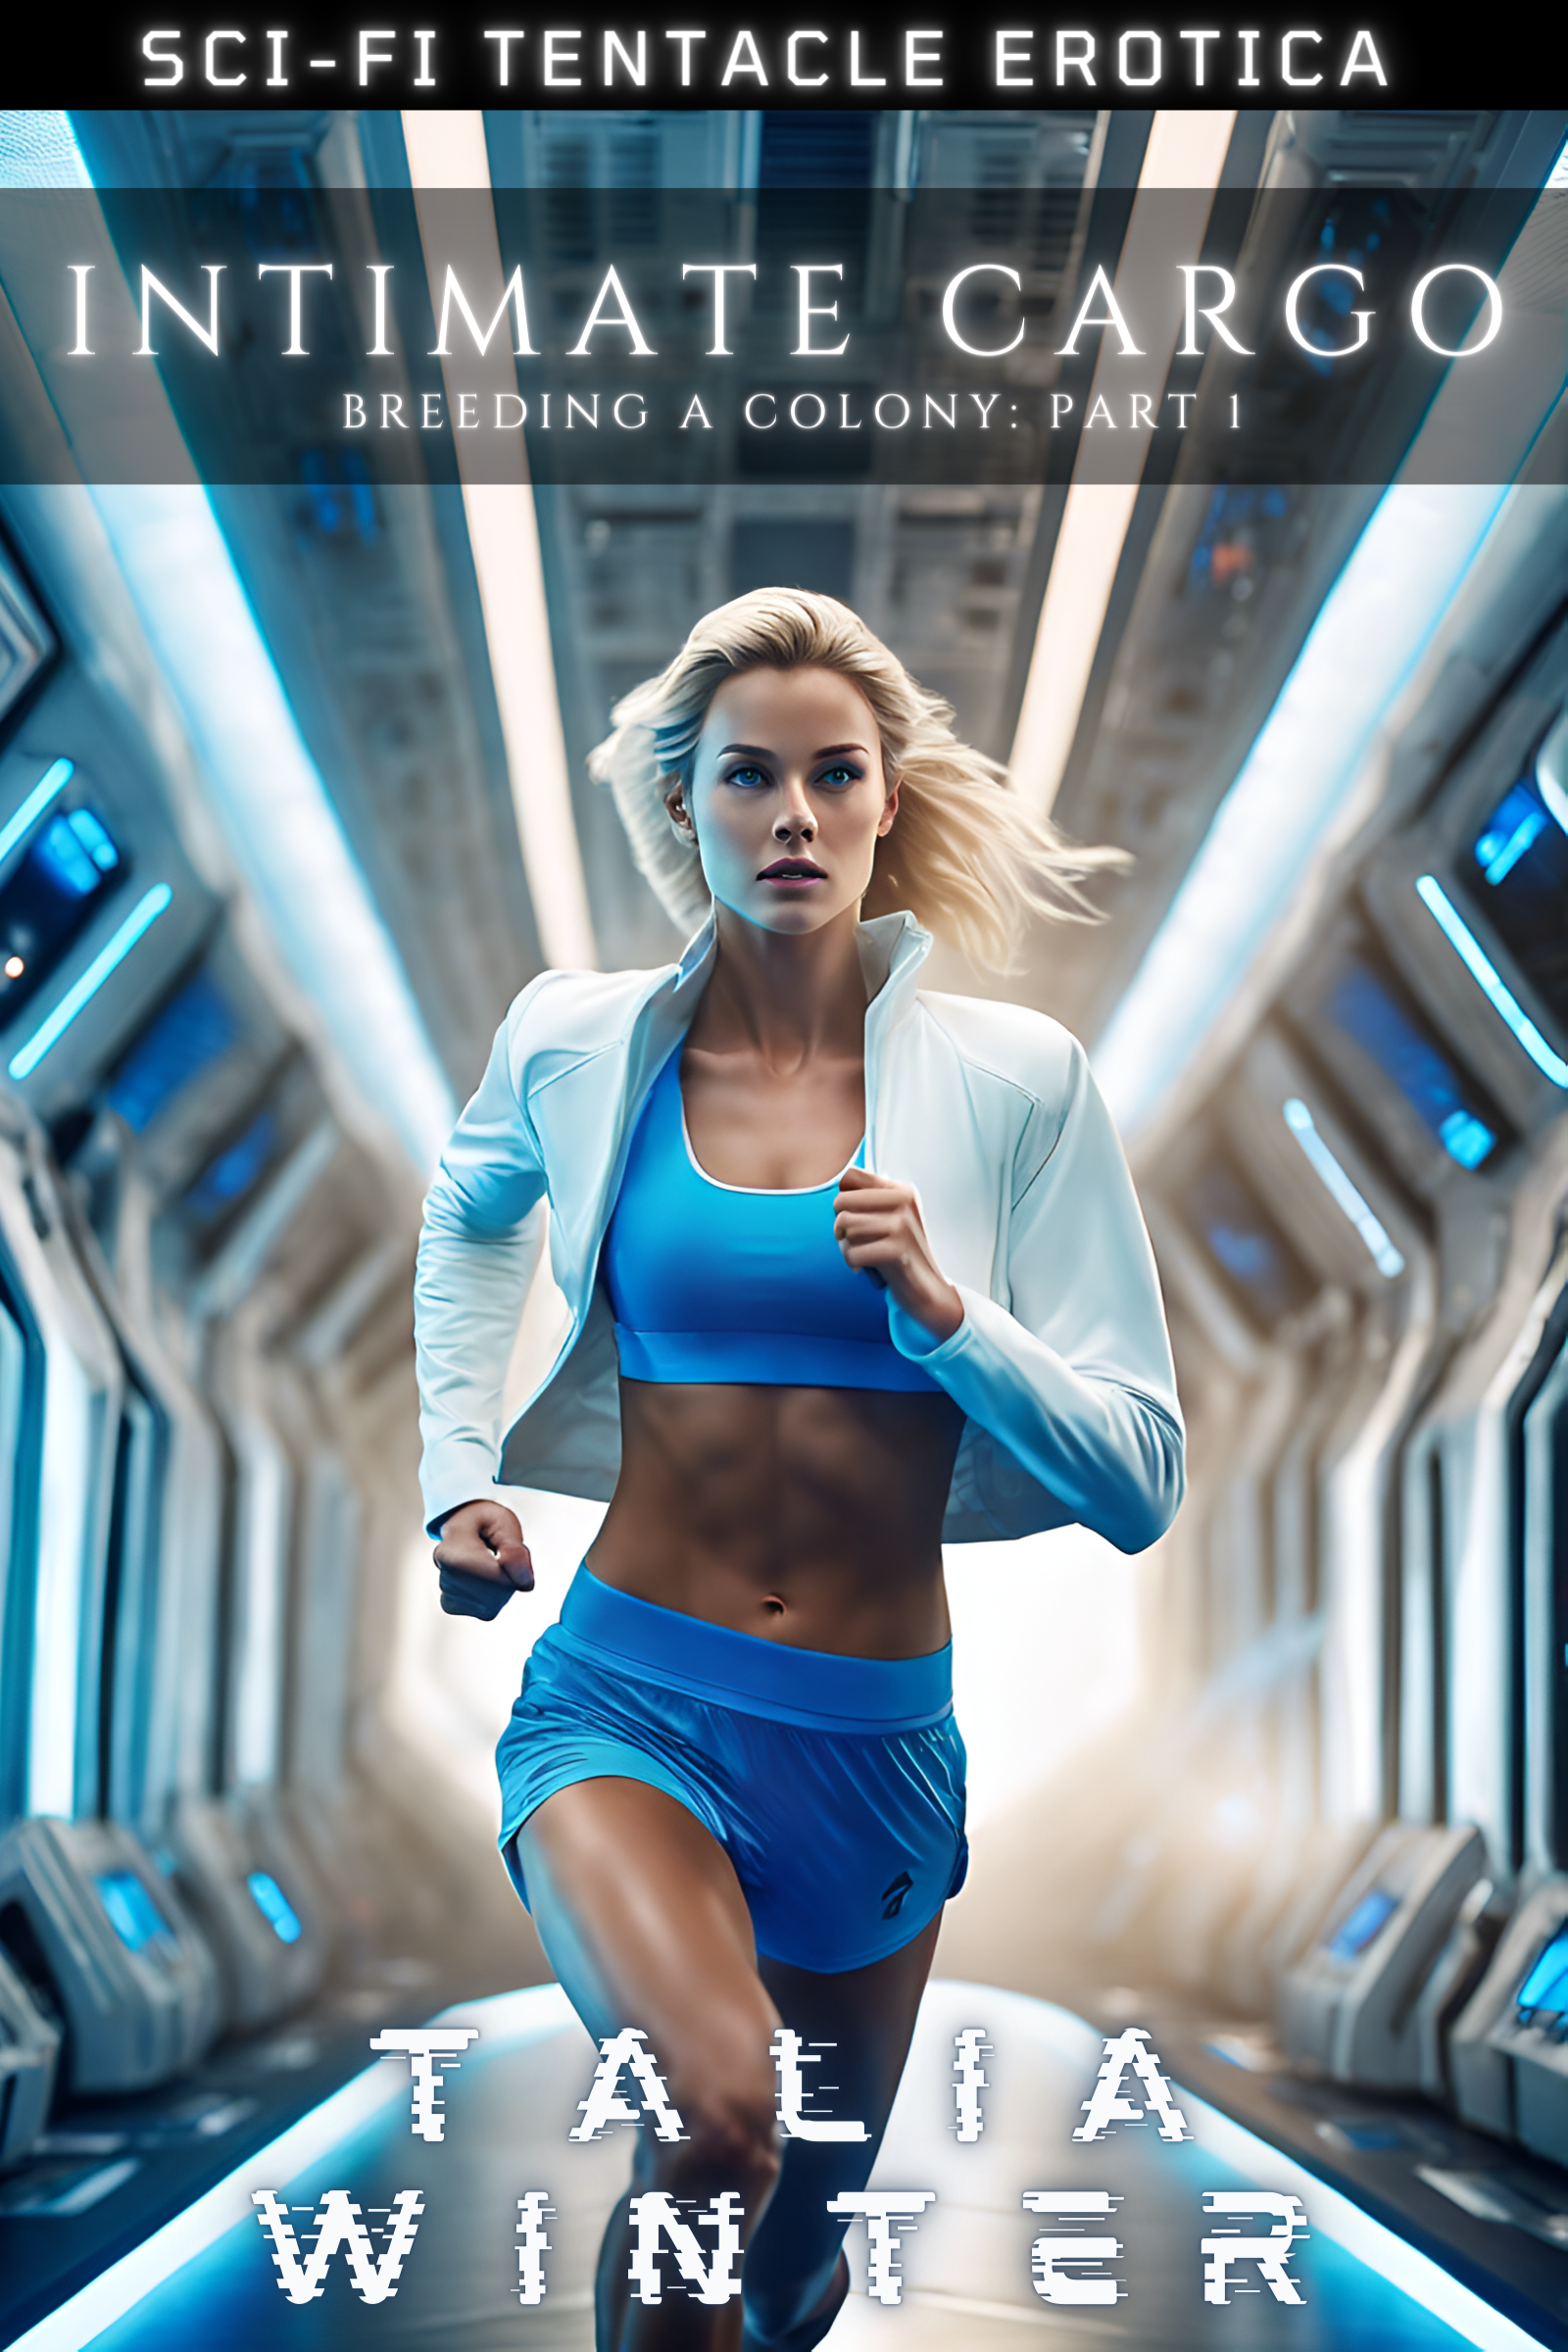 Cover art for &quot;Intimate Cargo&quot;: A woman in a sports bra, shorts, and jacket running down a sci-fi corridor.